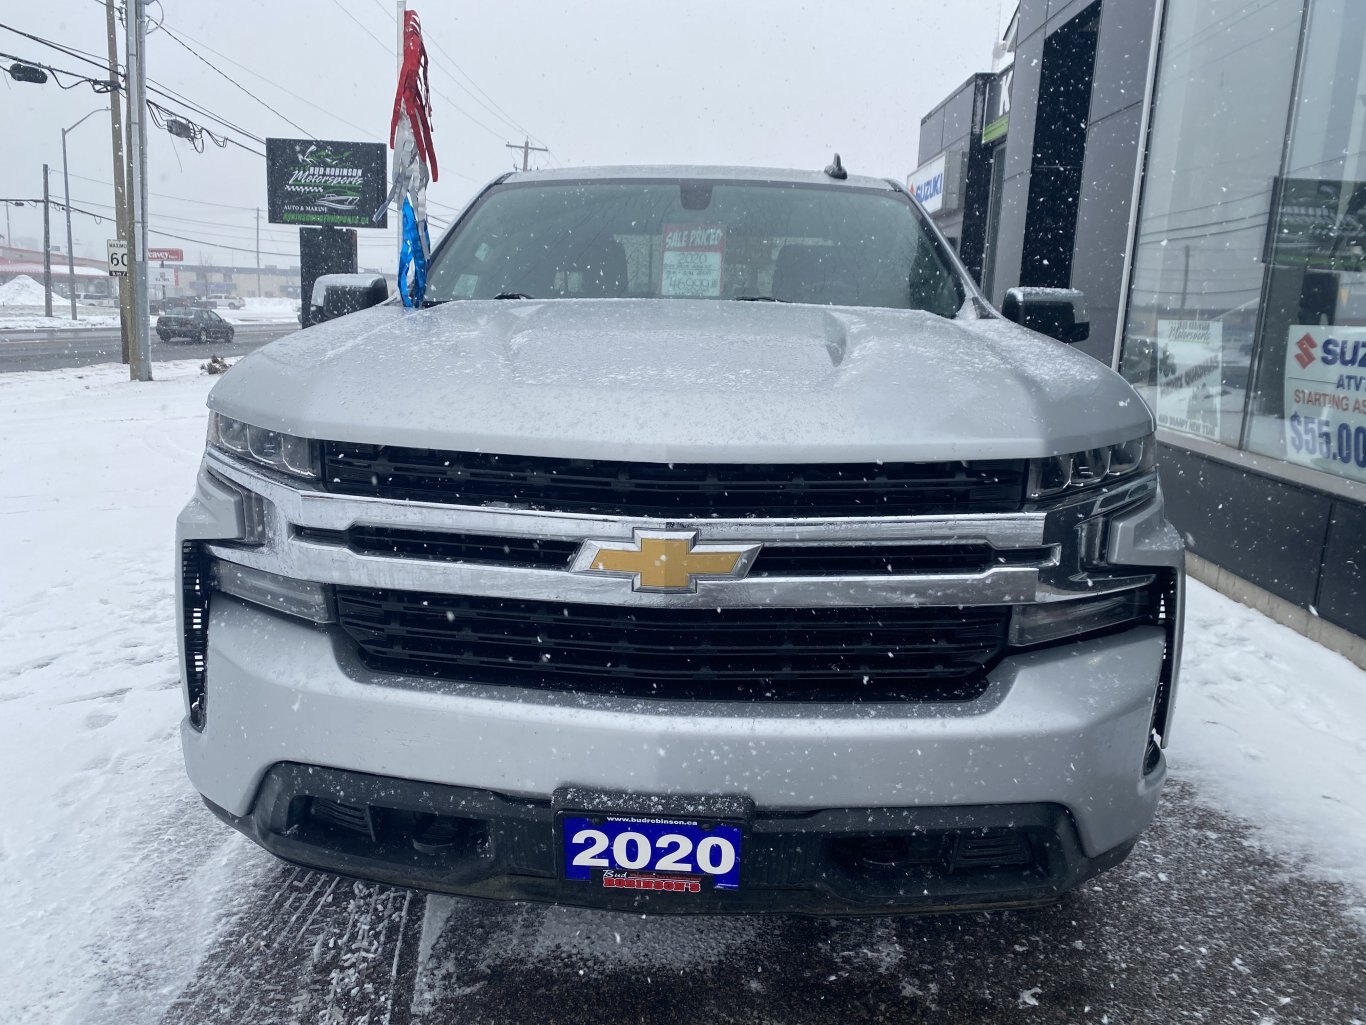 2020 CHEVROLET SILVERADO 1500 LT DOUBLE CAB WITH REAR VIEW CAMERA, ONSTAR SERVICES & HEATED SEATS!!